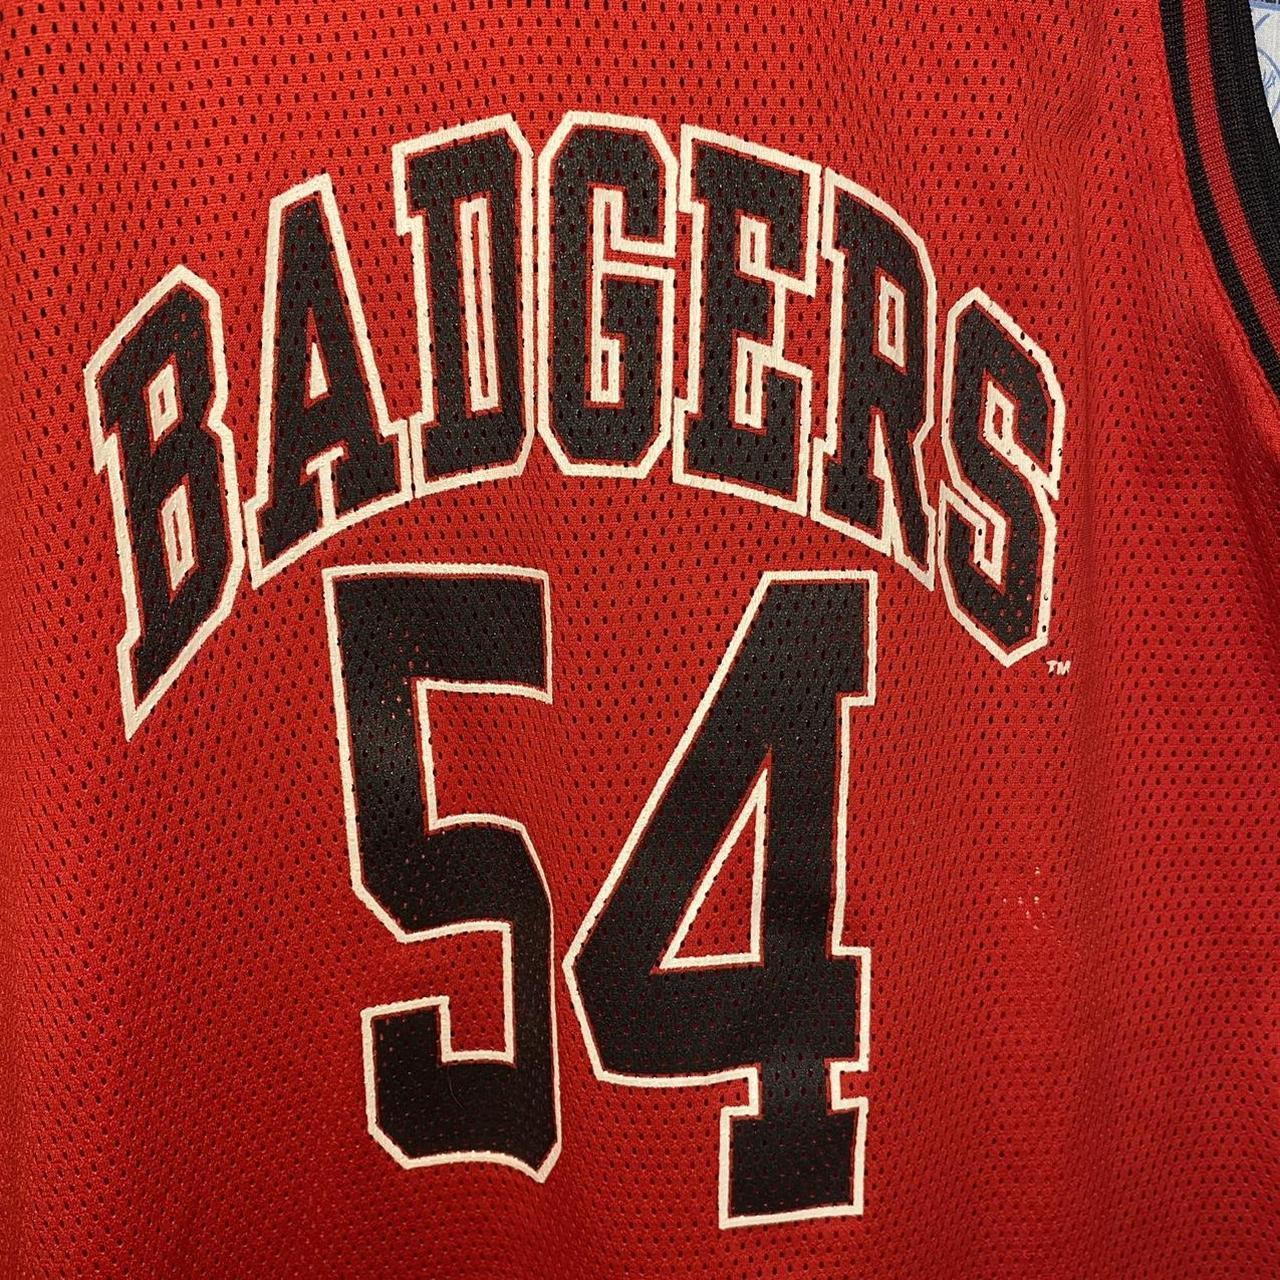 Product Image 3 - Wisconsin Badgers basketball jersey
Red Black,